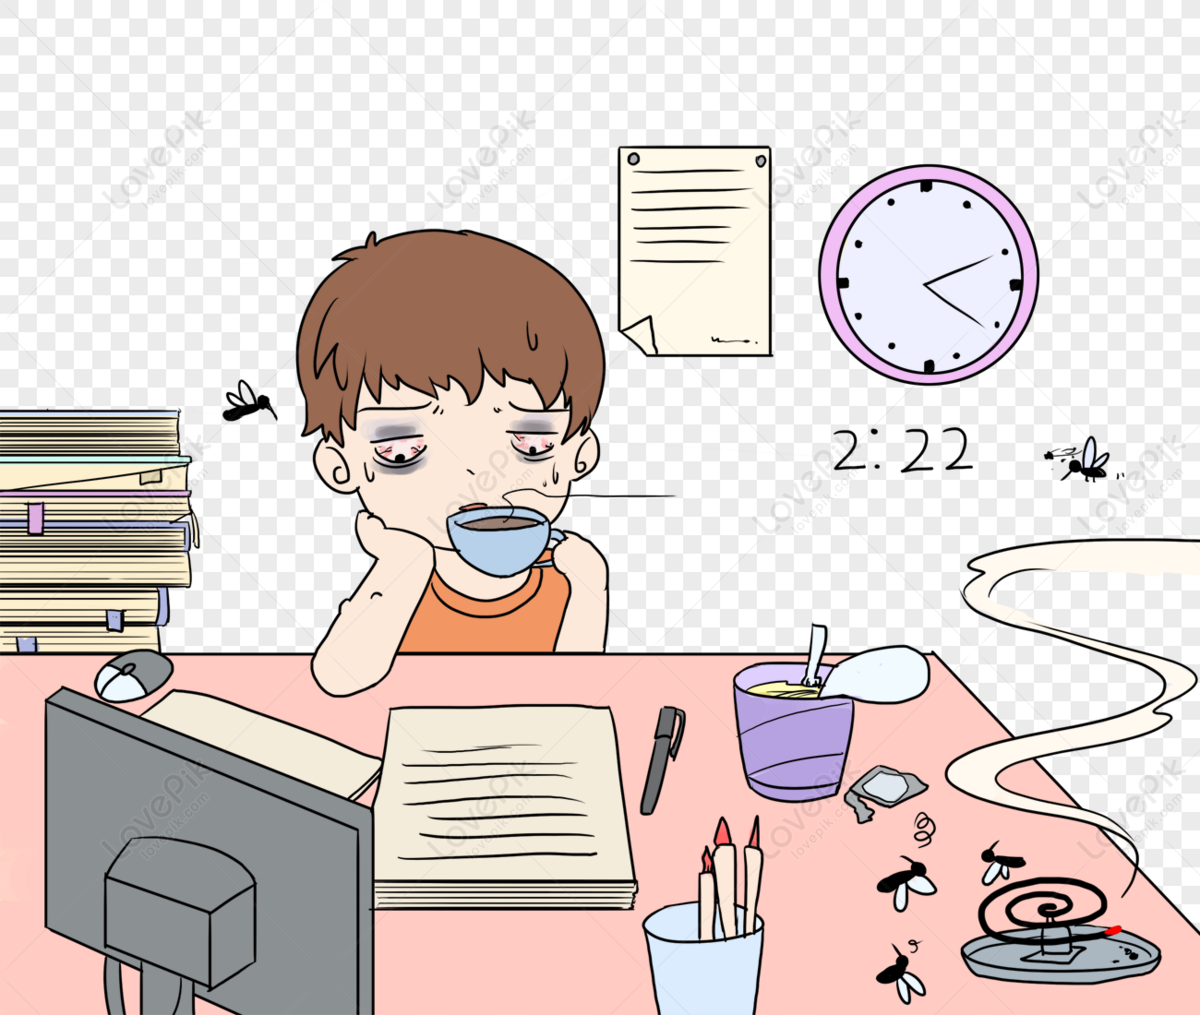 Boys who stay up late to do homework, computer, material, and homework png hd transparent image